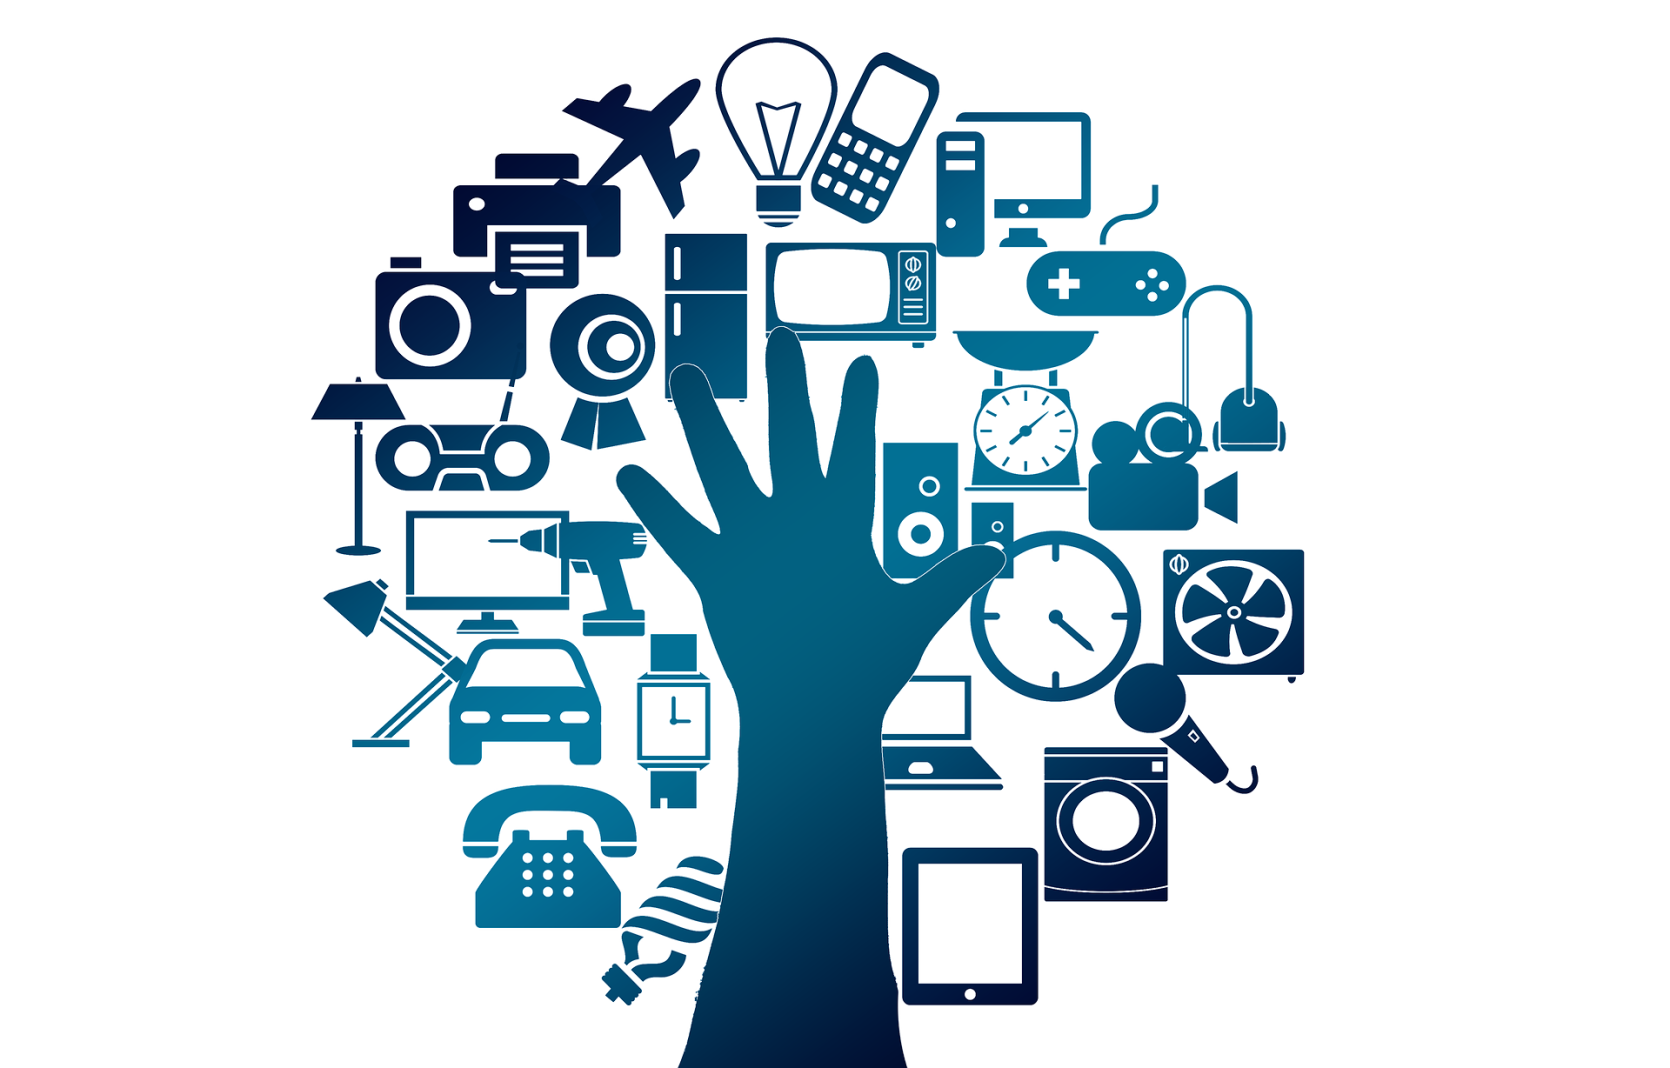 Icons of phones, lamps, computers, tablets, and other appliances with wireless capabilities.